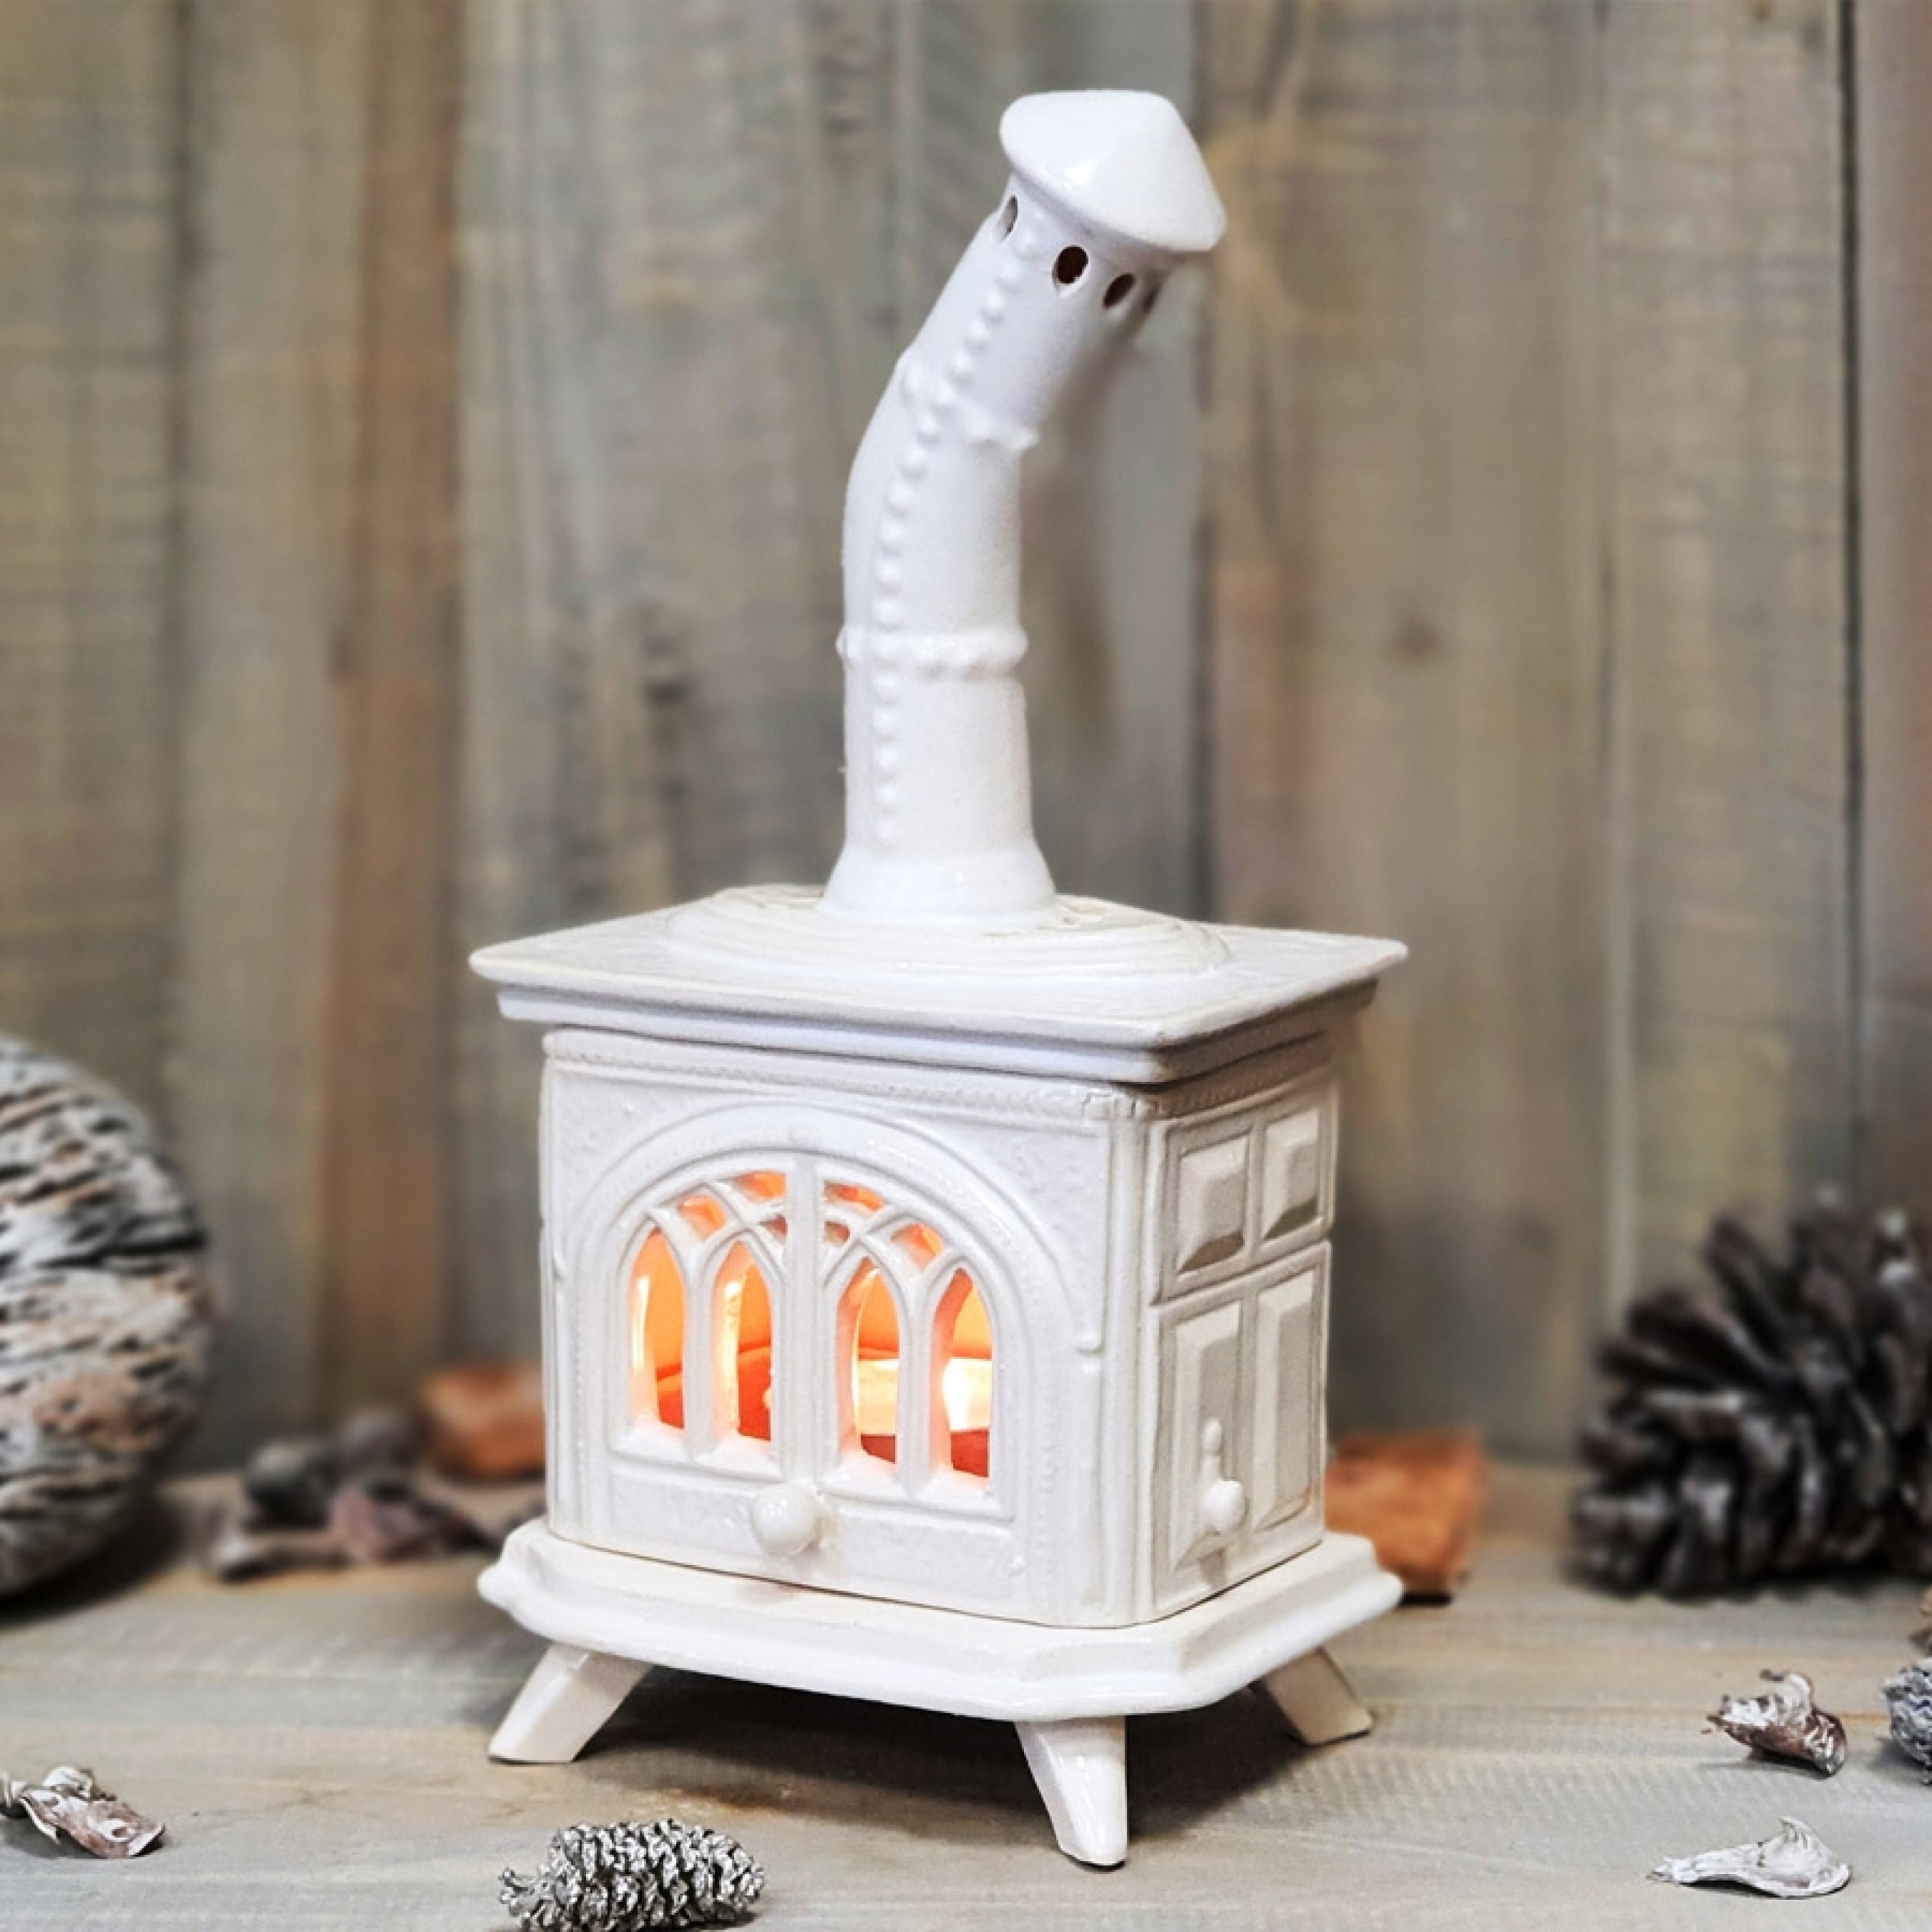 Handmade Ceramic Stove Miniature, Candle Holder, Candle Base, Stove Shaped  Figurine, Made in Greece, Greek Art, Unique Candleholder 